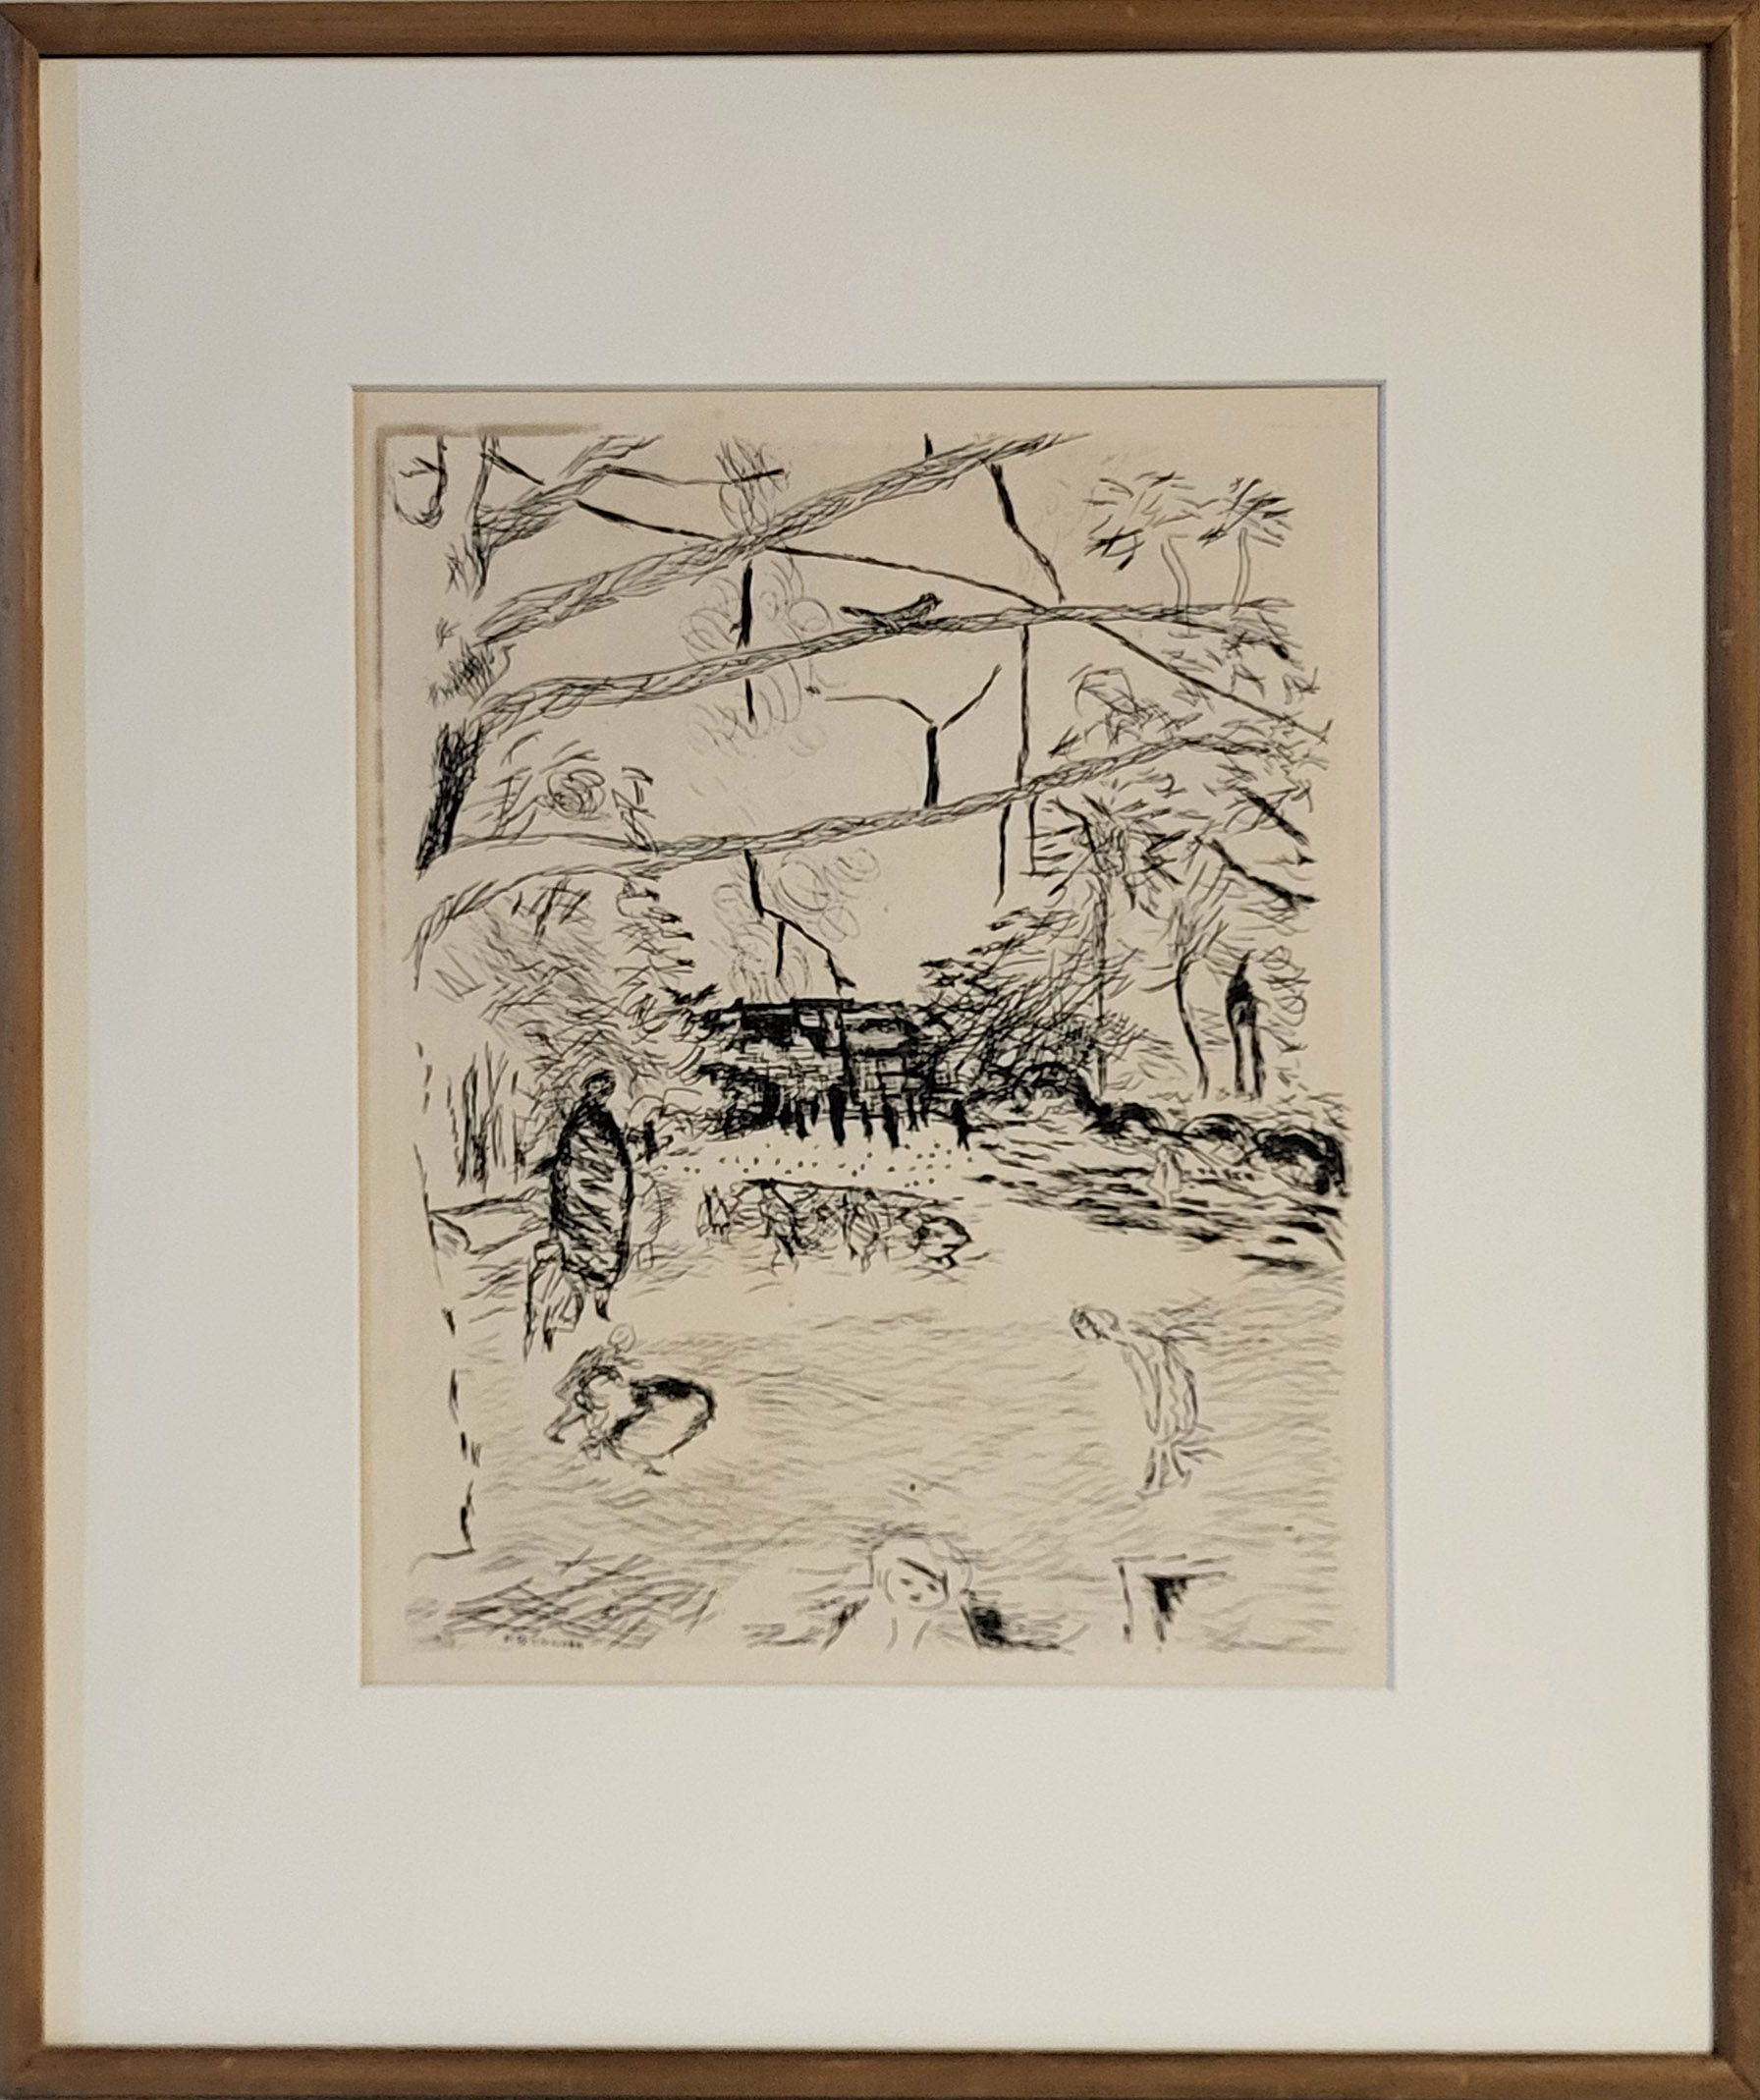 PIERRE BONNARD,1867 - 1947, A BLACK AND WHITE ETCHING Titled 'Le Parc Monceau', 1937, signed in - Image 2 of 5